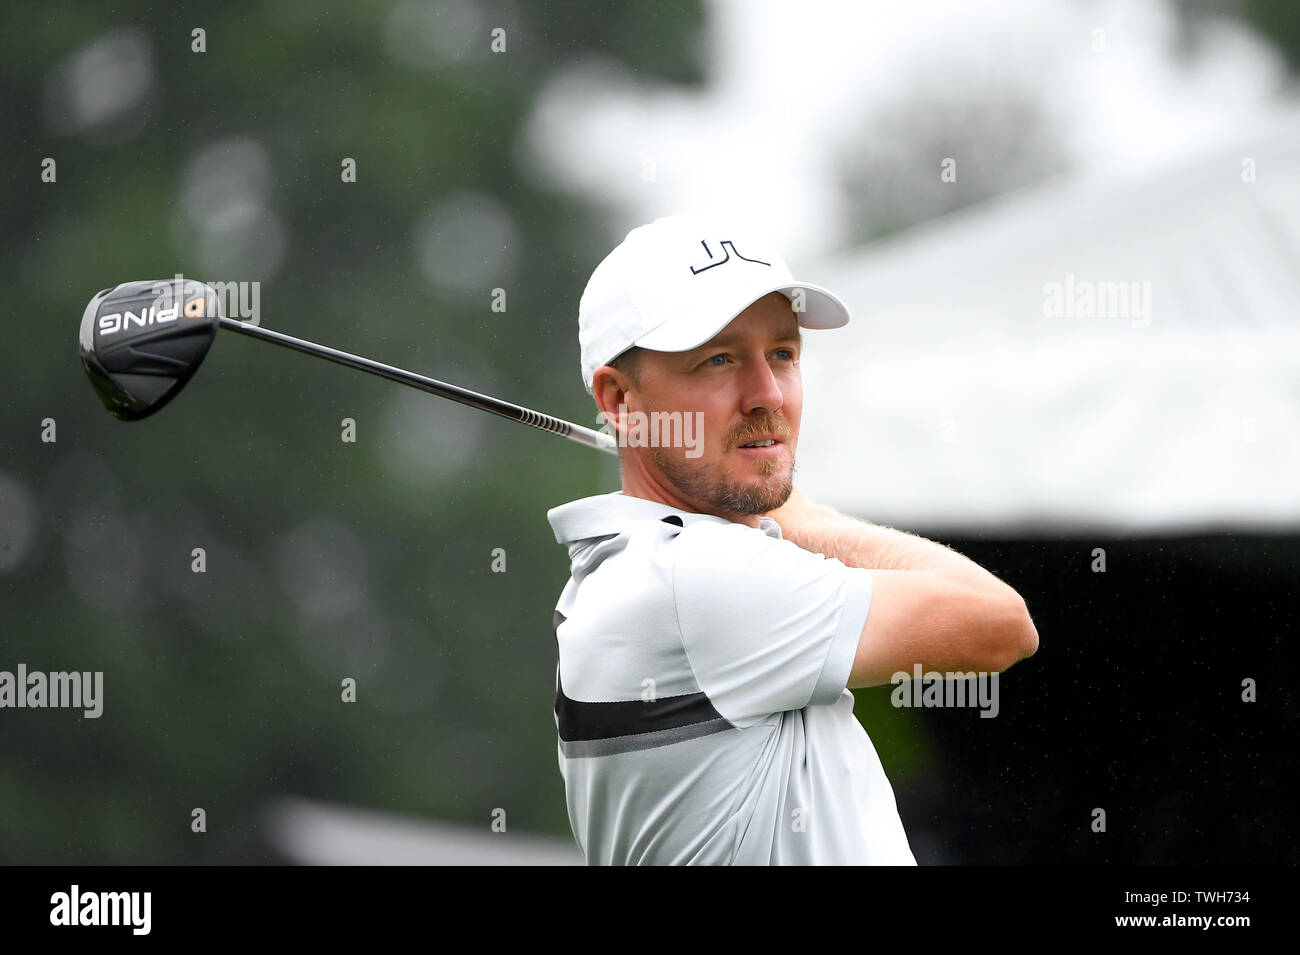 Cromwell CT, USA. 20th June, 2019. Jonas Blixt (SWE) watches the flight of his ball down the first fairway during the first round of the PGA Travelers Championship golf tournament held at TPC River Highlands in Cromwell CT. Eric Canha/Cal Sport Media/Alamy Live News Stock Photo